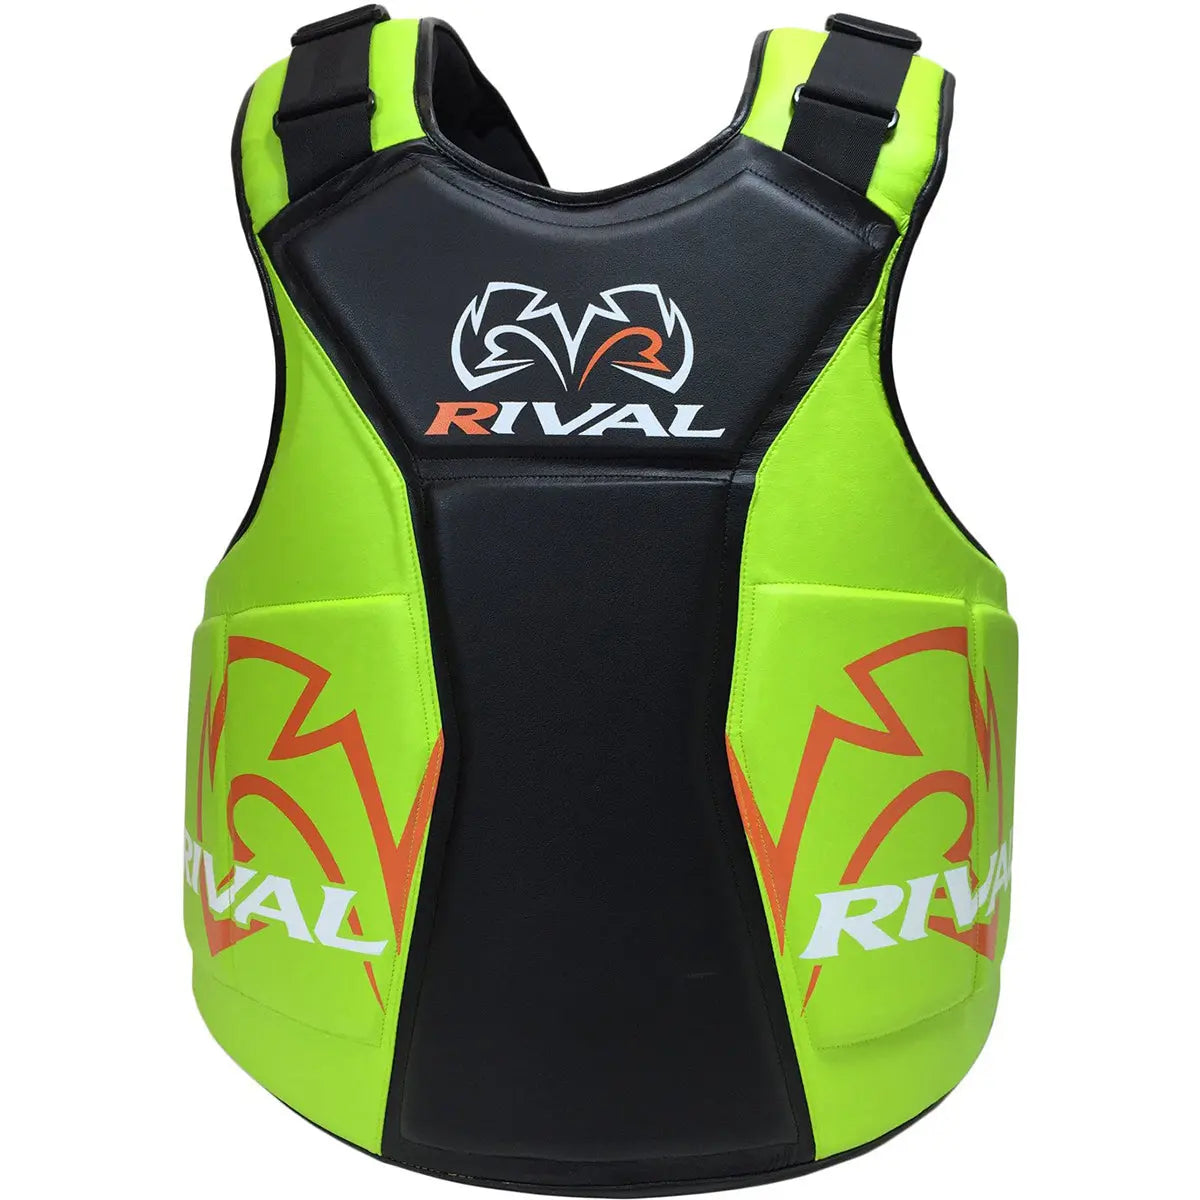 RIVAL Boxing RBP Training Body Protector RIVAL